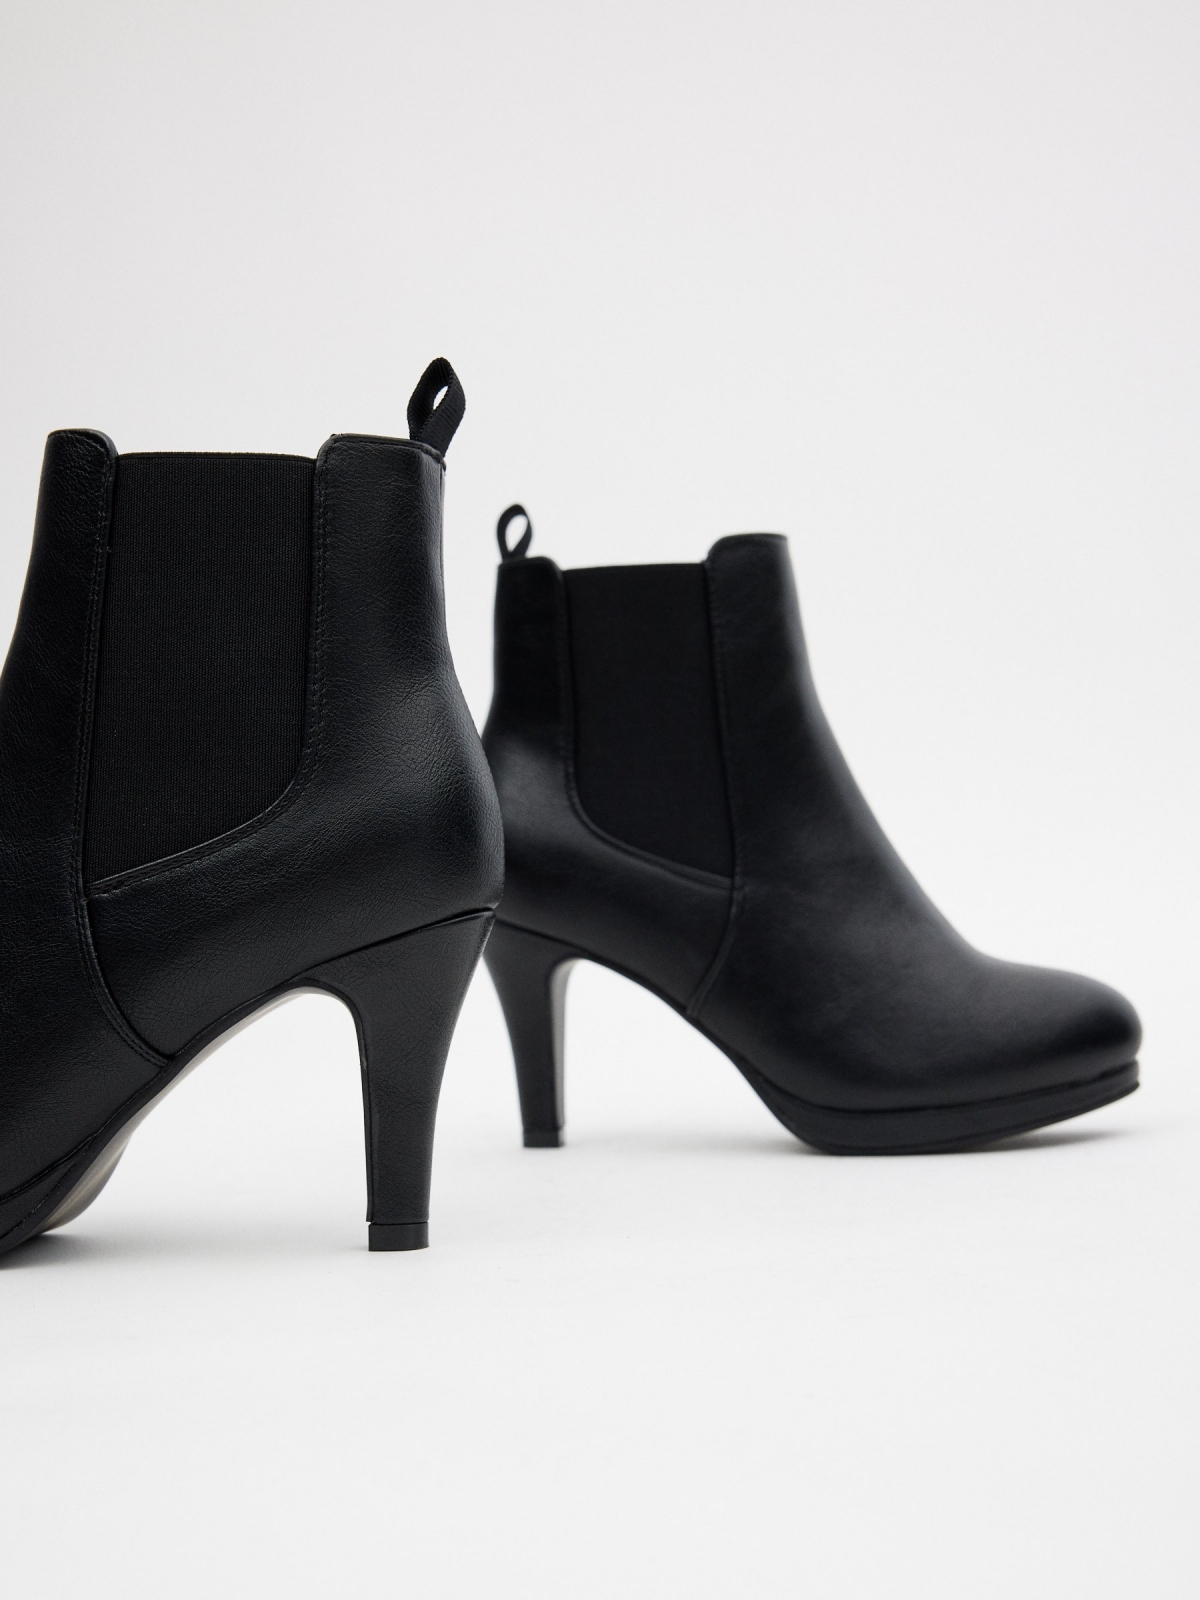 Elastic ankle boots with fine heel detail view